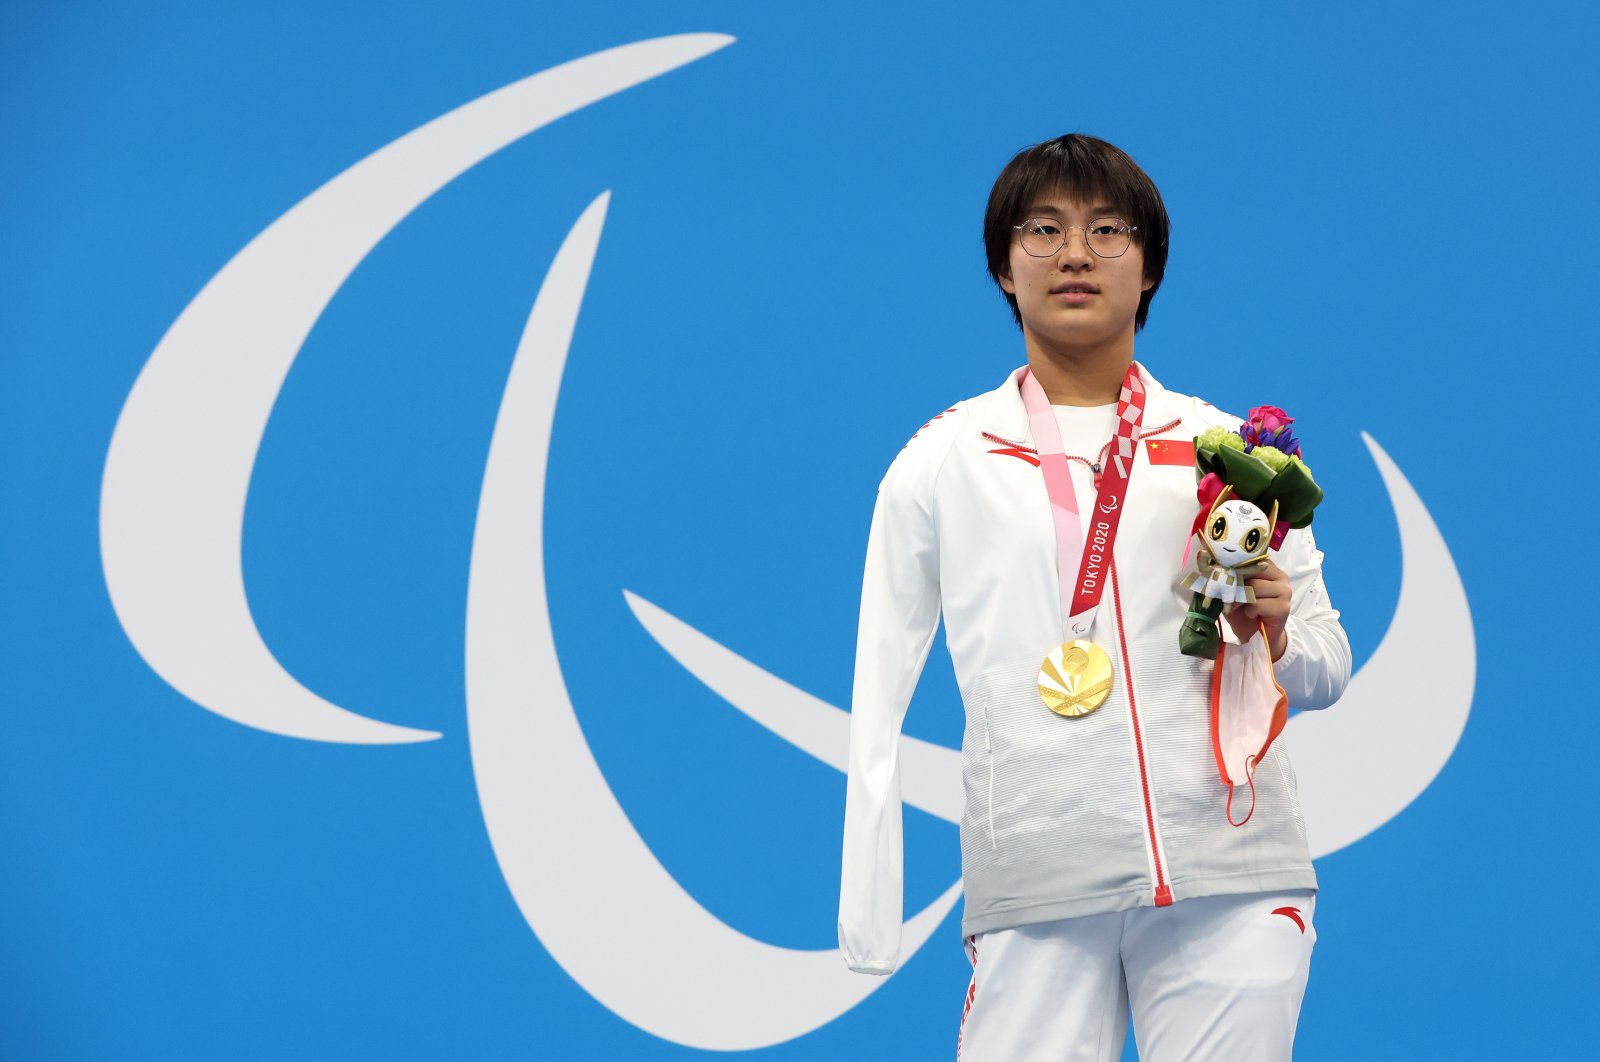 China's Yuyan Jiang poses after winning Tokyo 2020 Paralympic gold in the women's 50-meter butterfly S6 event at the Tokyo Aquatics Centre, Tokyo, Japan, Aug. 30, 2021. (Reuters Photo)